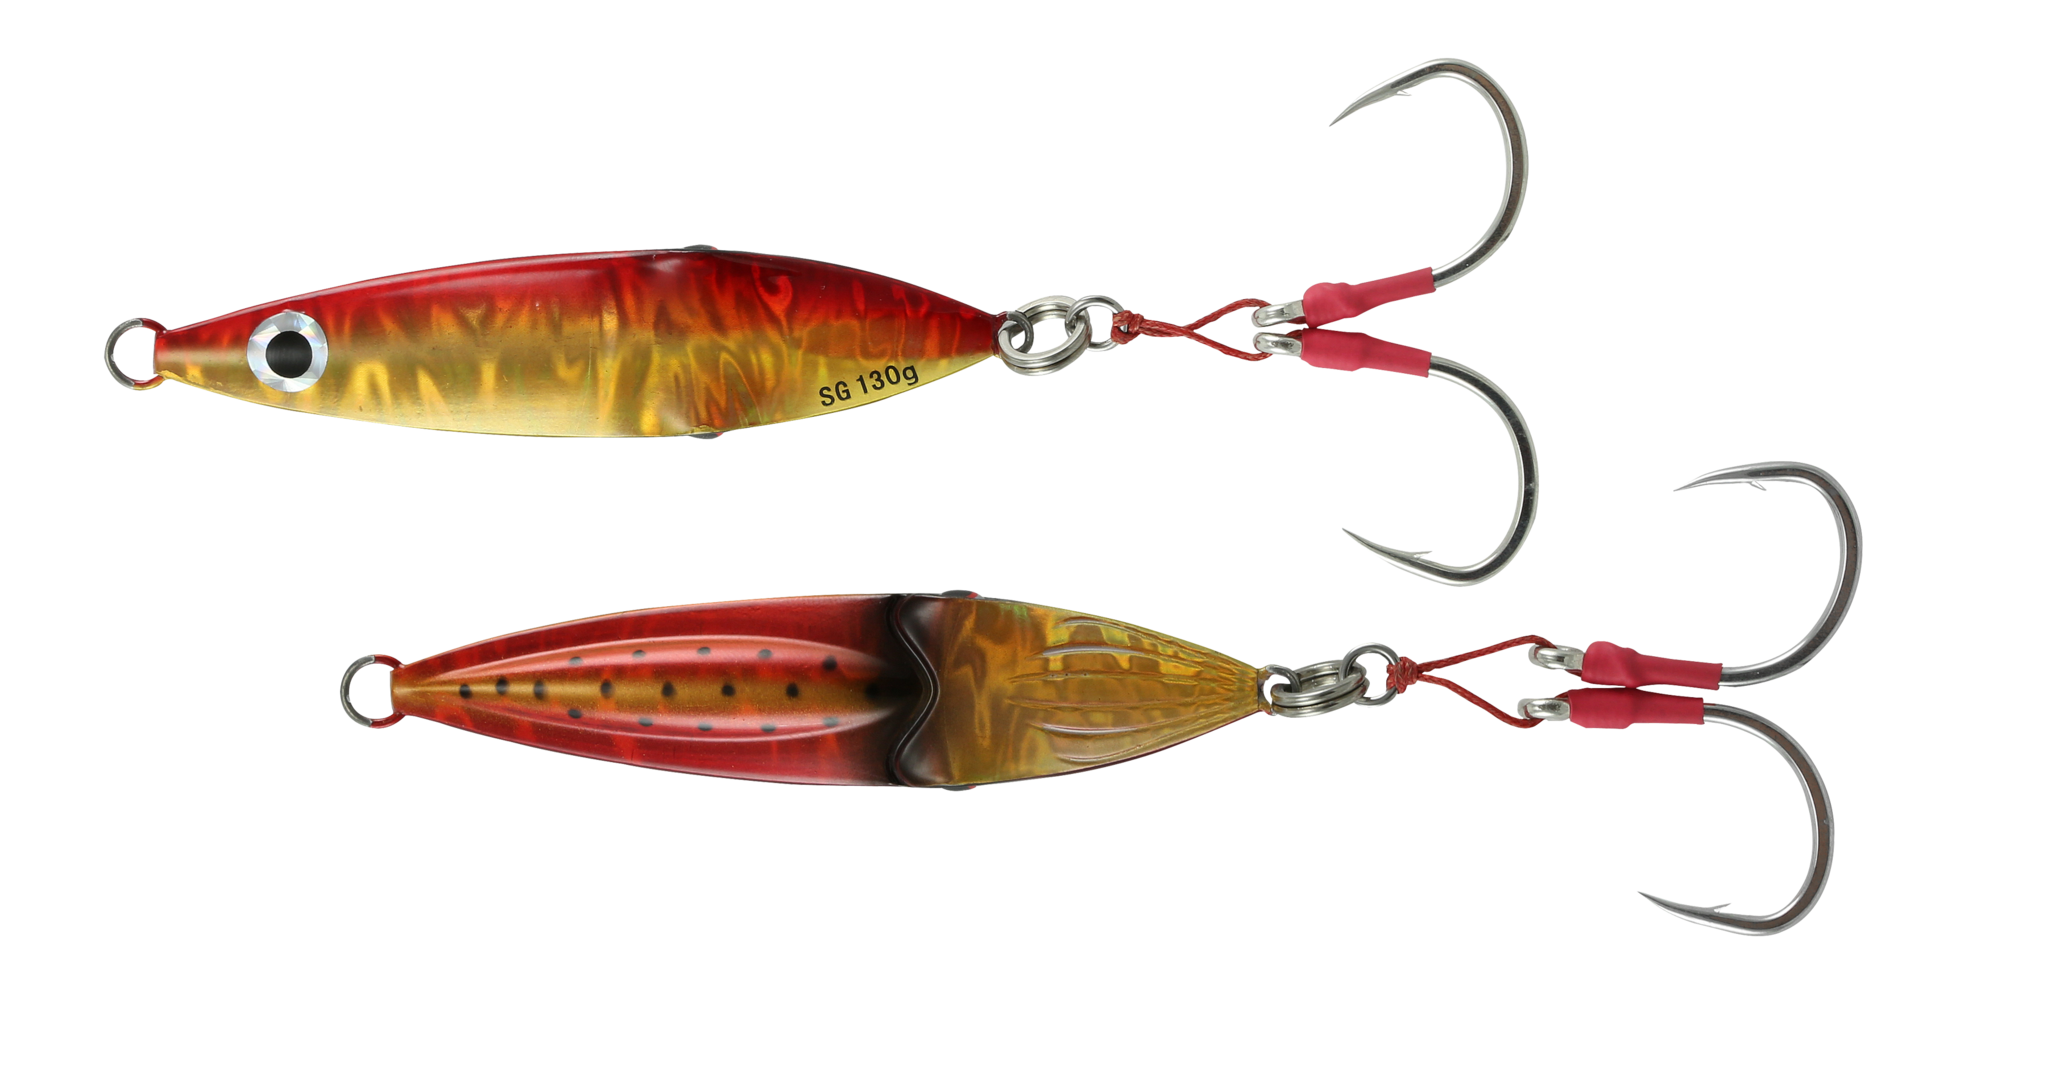 Savage Gear SJ-130-GR Squish Jig 130g Gold Red - Angler's Choice